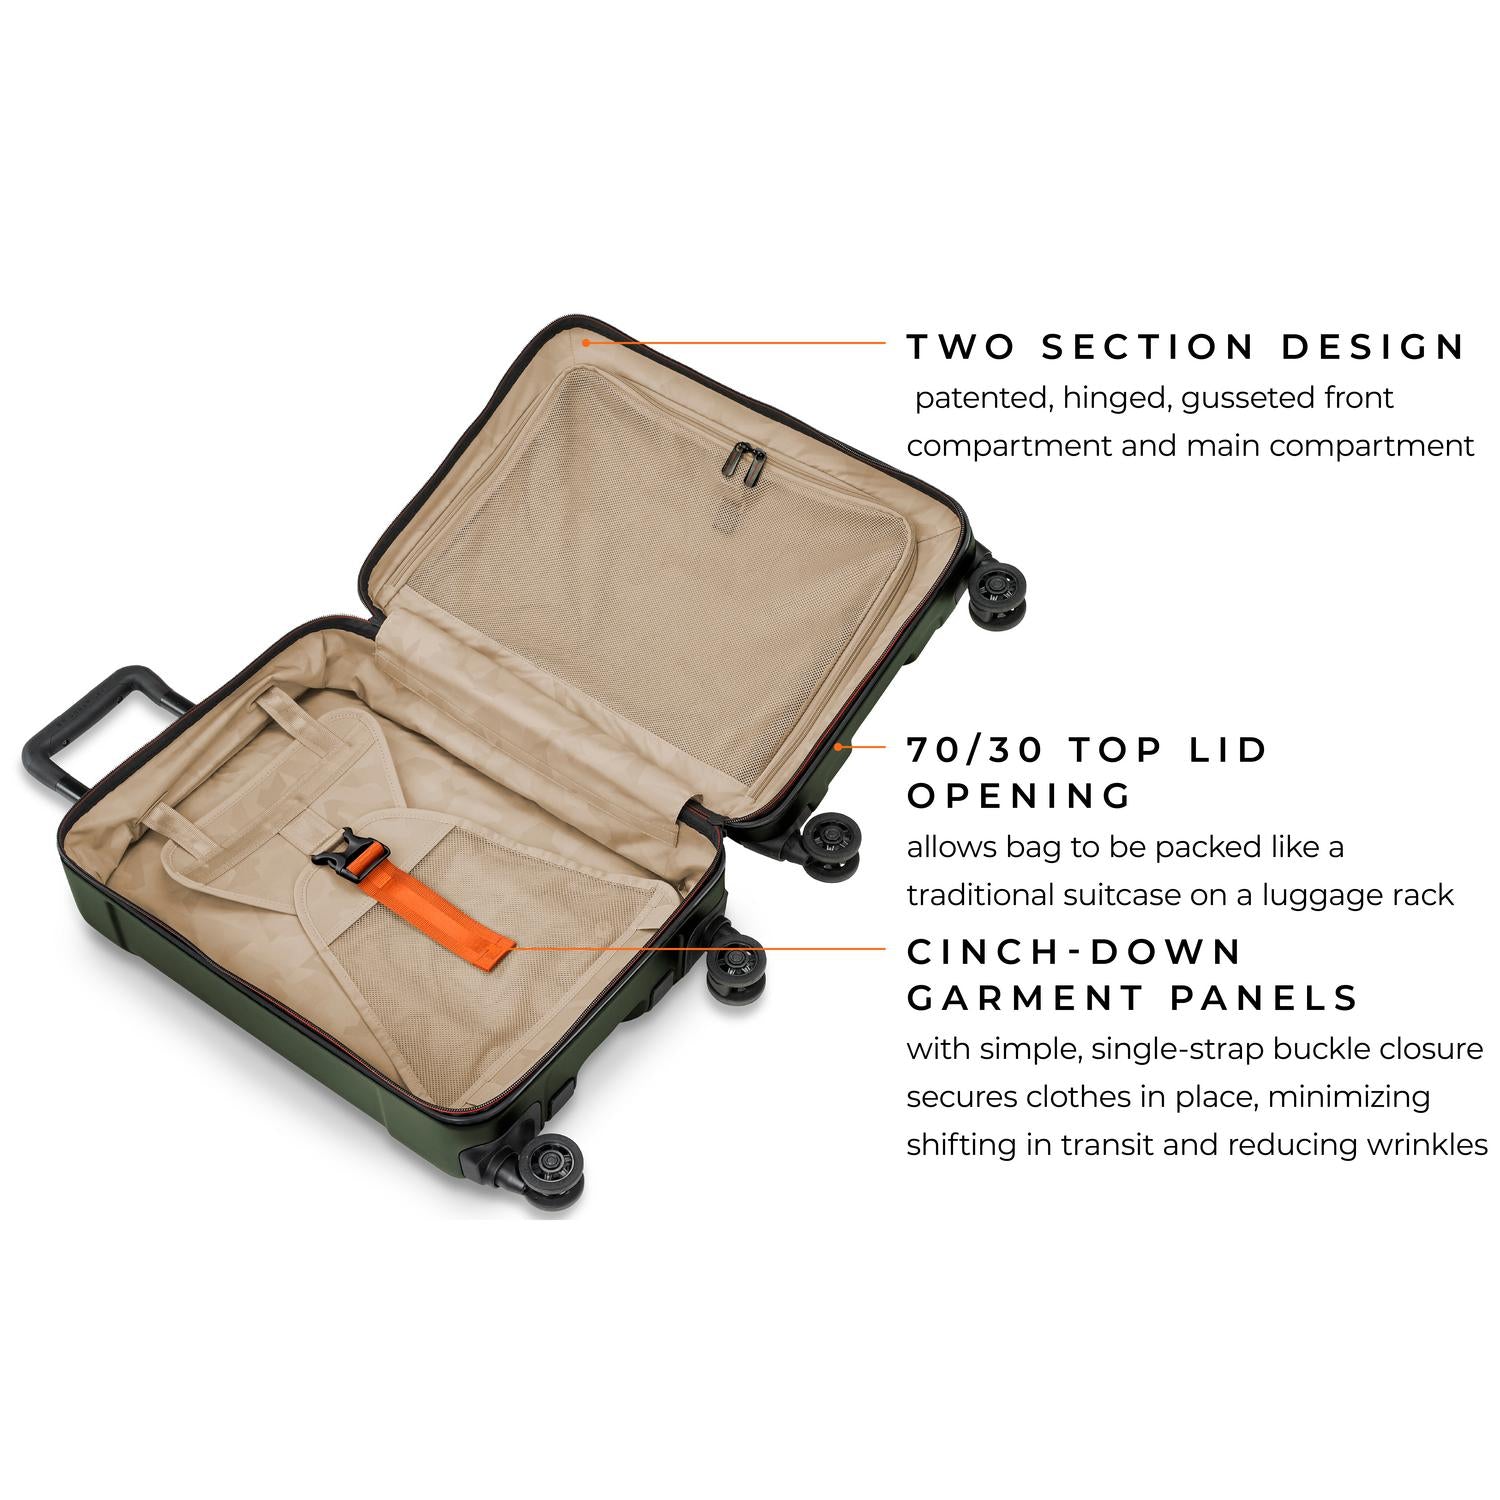 briggs & riley torq green international 21" carry-on spinner built-in mesh suiter with removable, adjustable foam roll bar neatly holds a suit or garment or 1-2 shirts and cinches them securely in place to prevent wrinkling; orange tabs indicate adjustable components, tilt-resistant wheel base for maximum stability, factal camouflage interior lining pattern treats items gently and is light-colored to make finding contents easy  #color_hunter